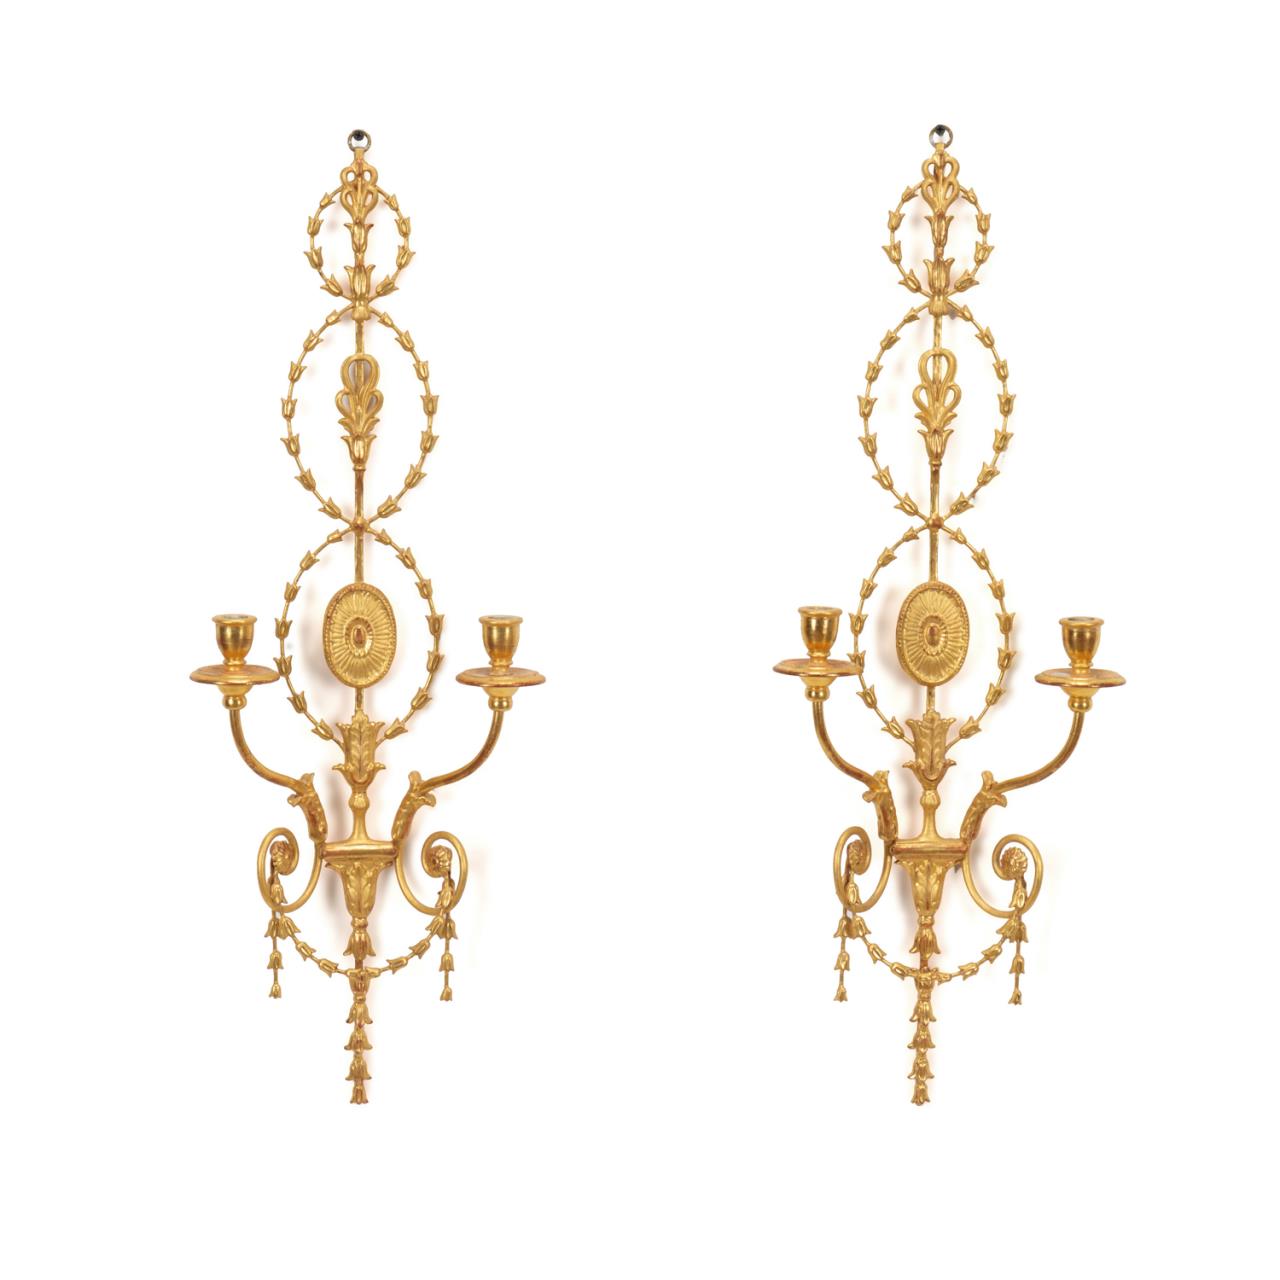 PR WALL HANGING CANDLE SCONCES IN THE